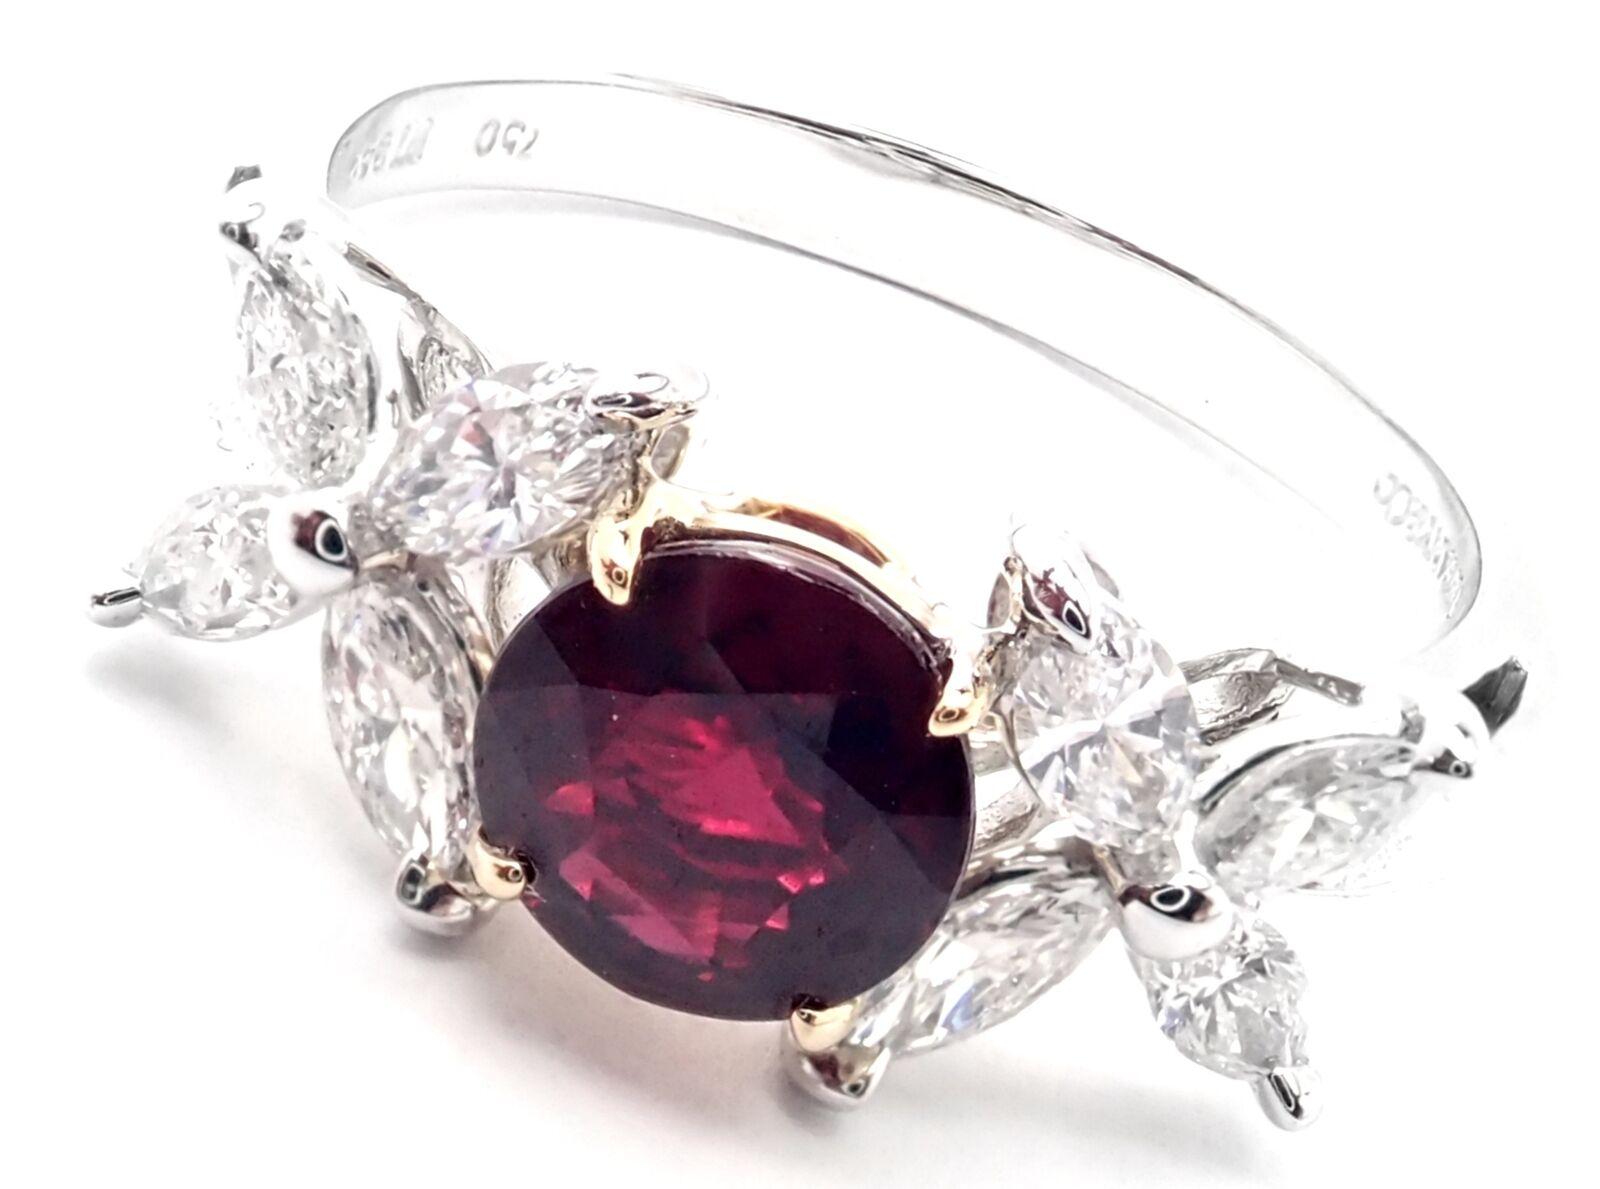 Platinum Diamond Sapphire Victoria Ring by Tiffany & Co. 
With 8 Marques cut diamonds VVS1 clarity, E color total weight approx. .60ct
1 ruby 5.8mm approximately .45ct
Details: 
Weight: 4.6 grams
Width: 9mm
Ring Size: 6.5
Stamped Hallmarks: